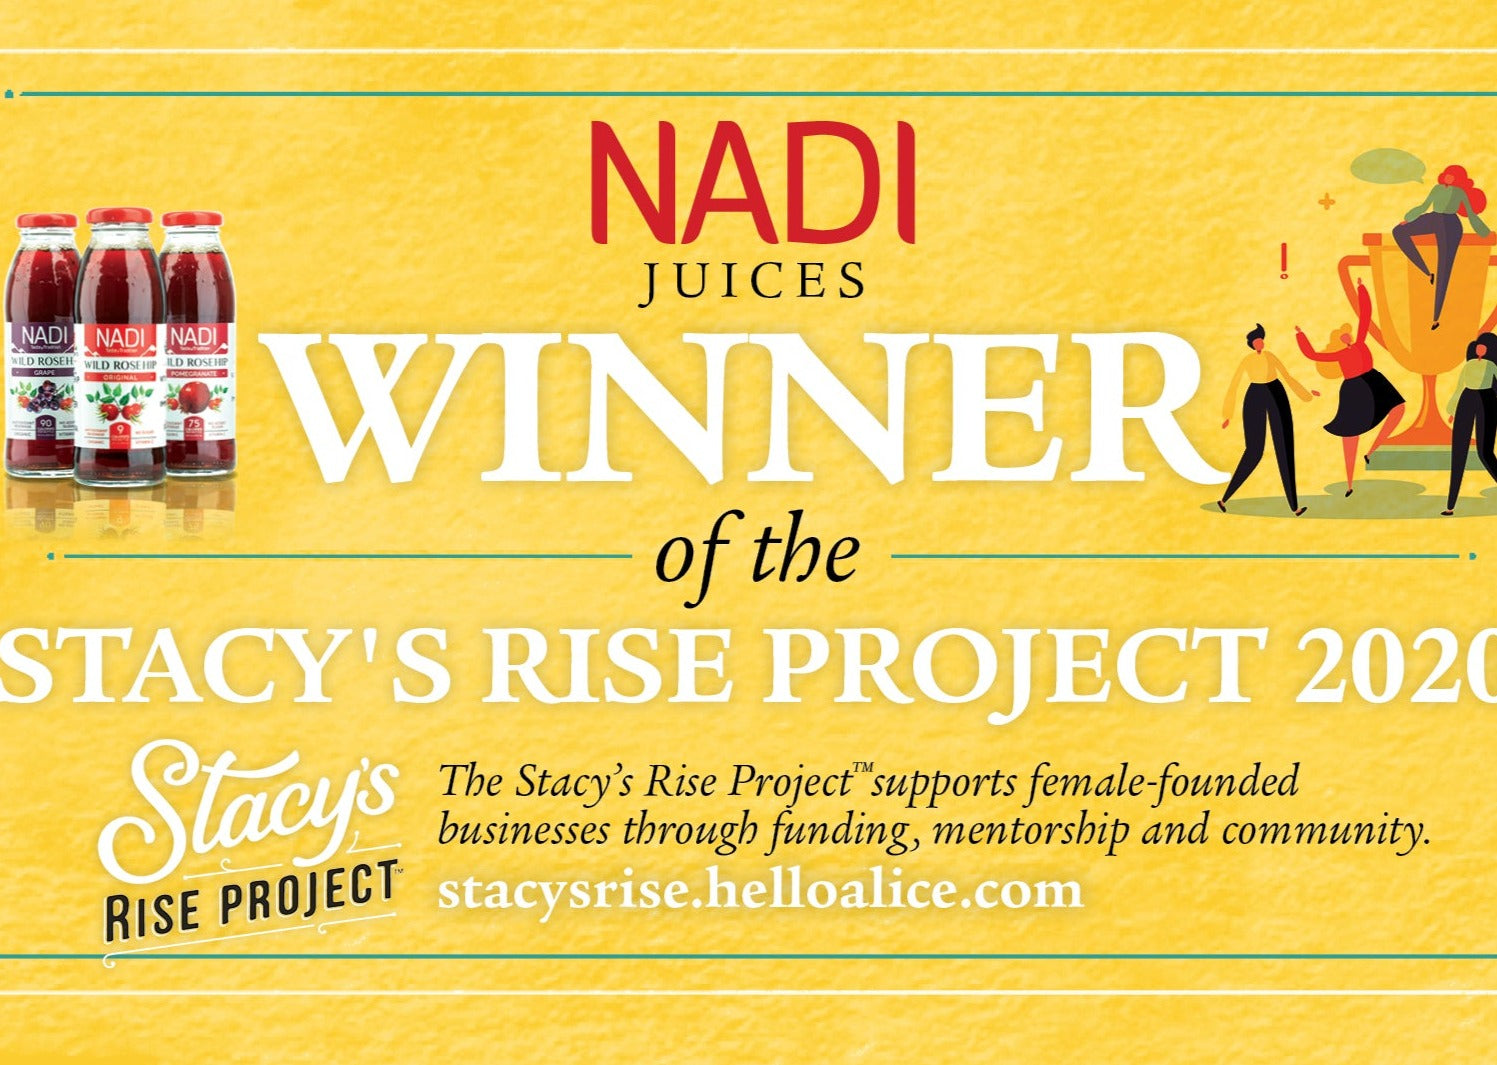 NADI Juices winner of the Stacy's Rise Project 2020 